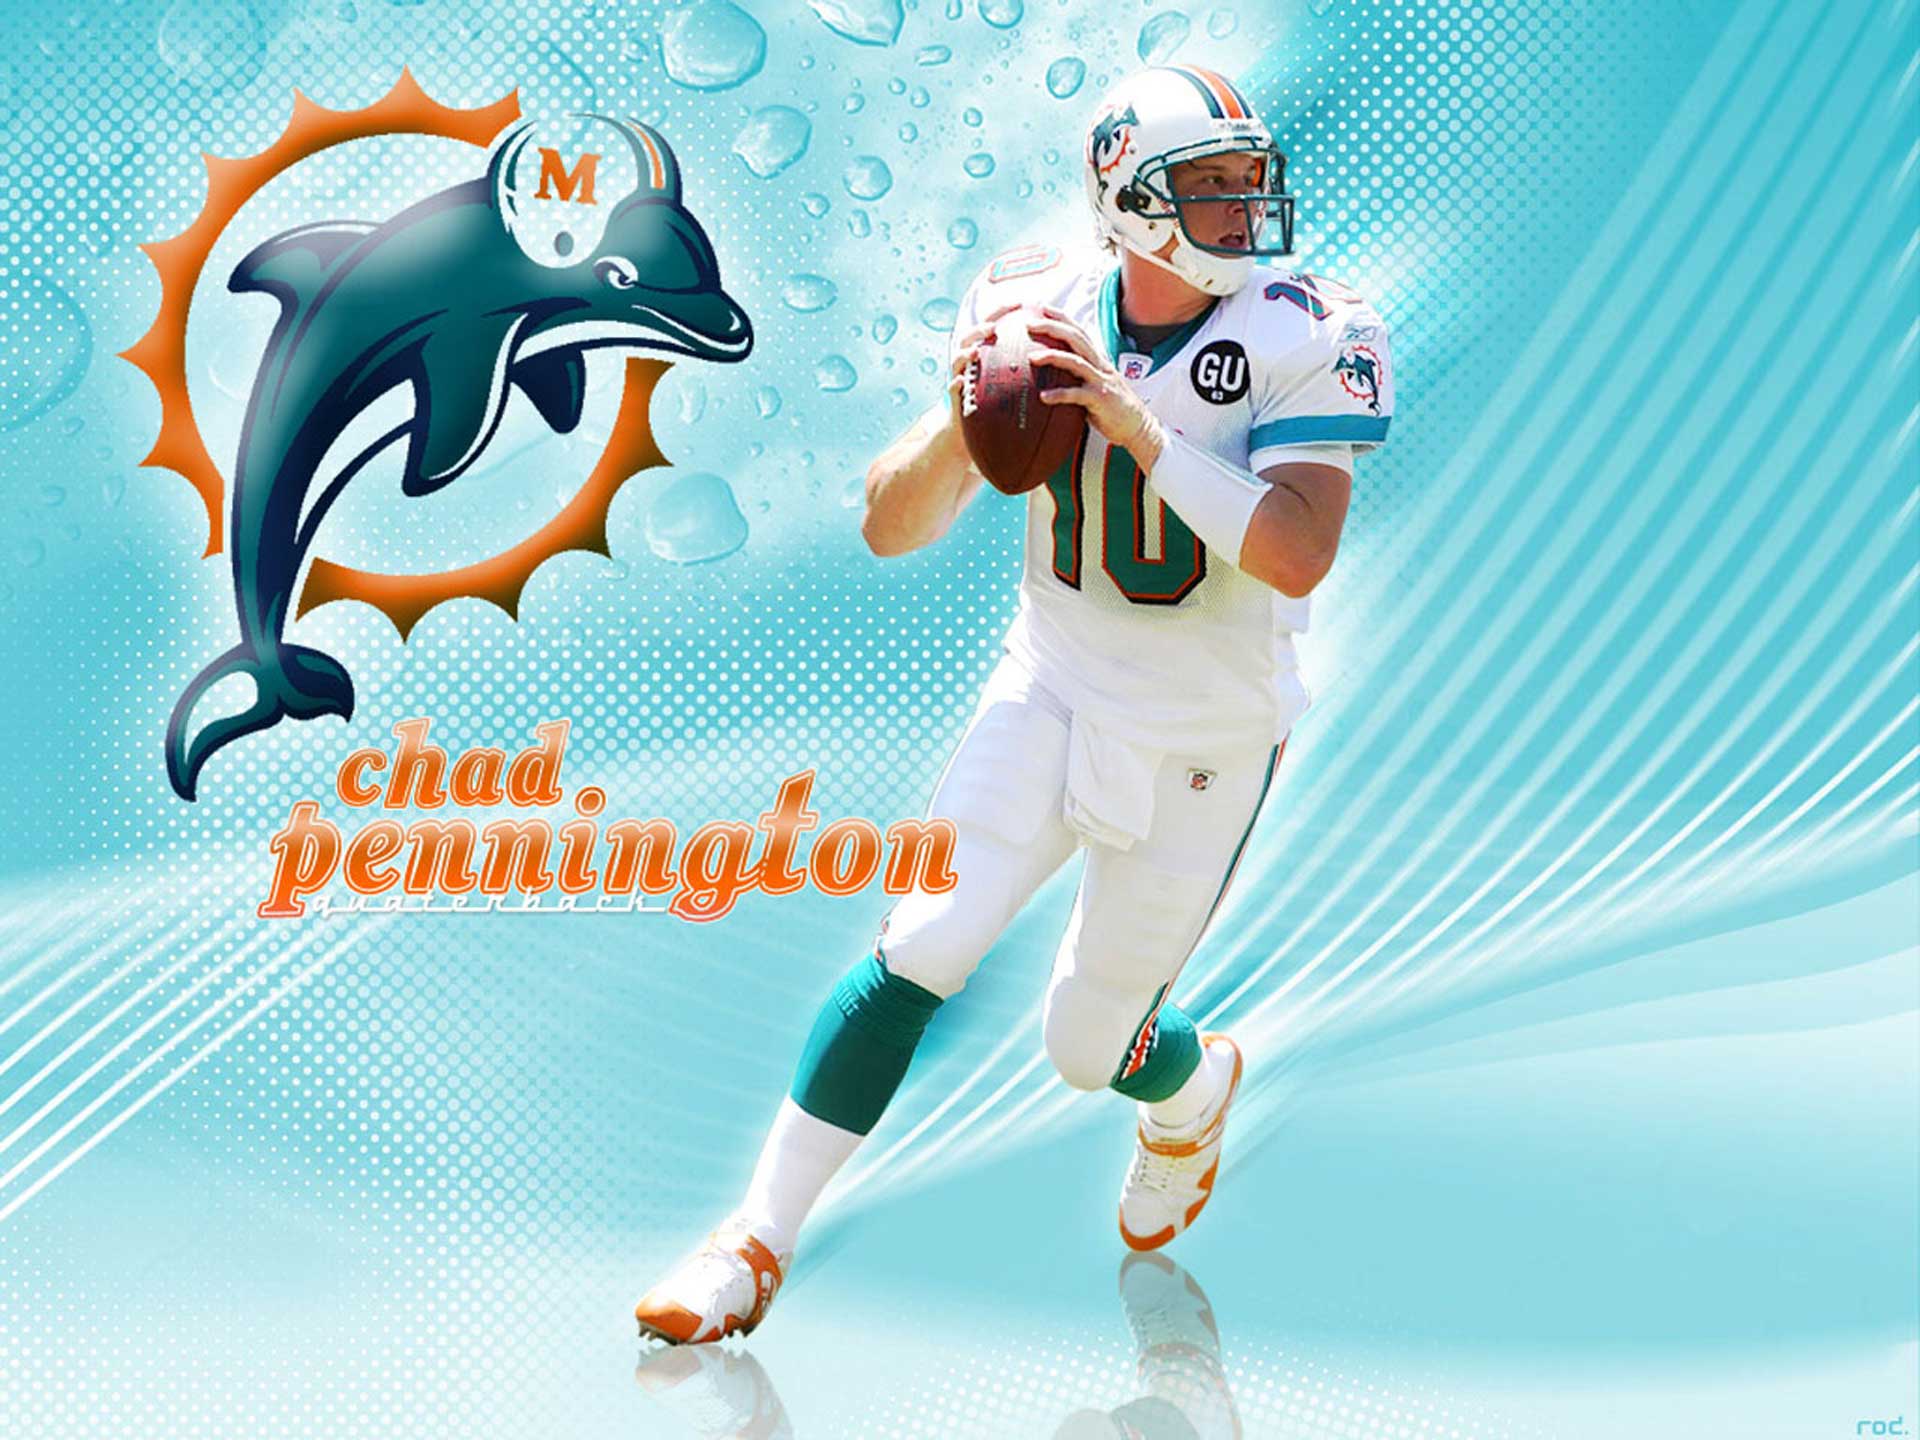 Nflwallpaper10 Miami Dolphins Wallpaper